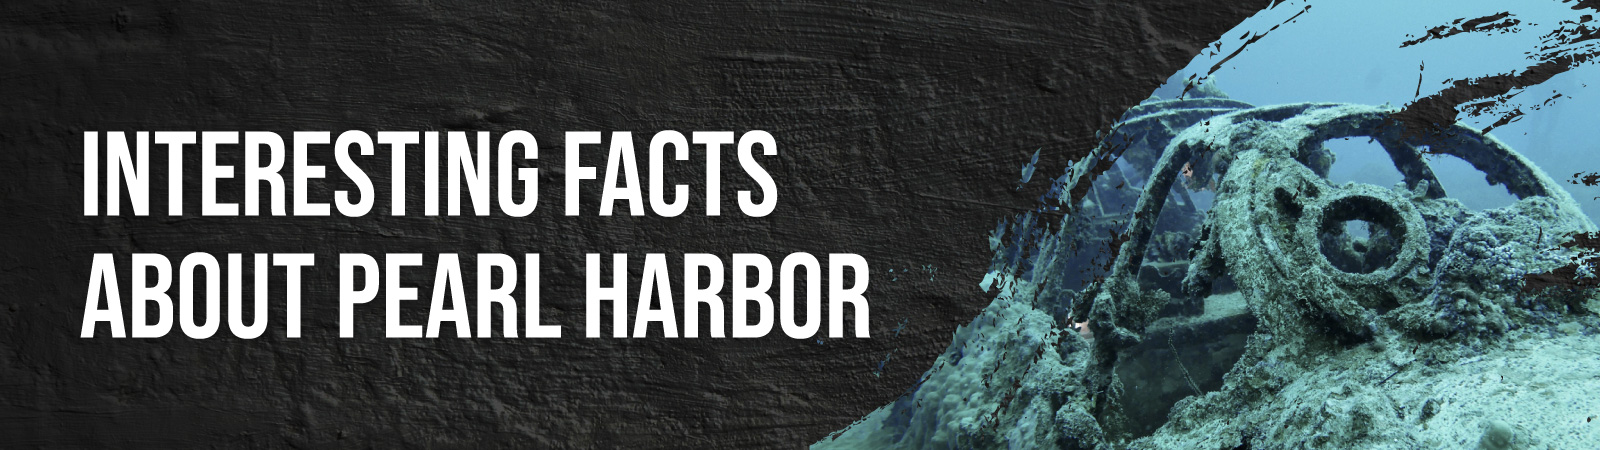 Interesting Facts About Pearl Harbor